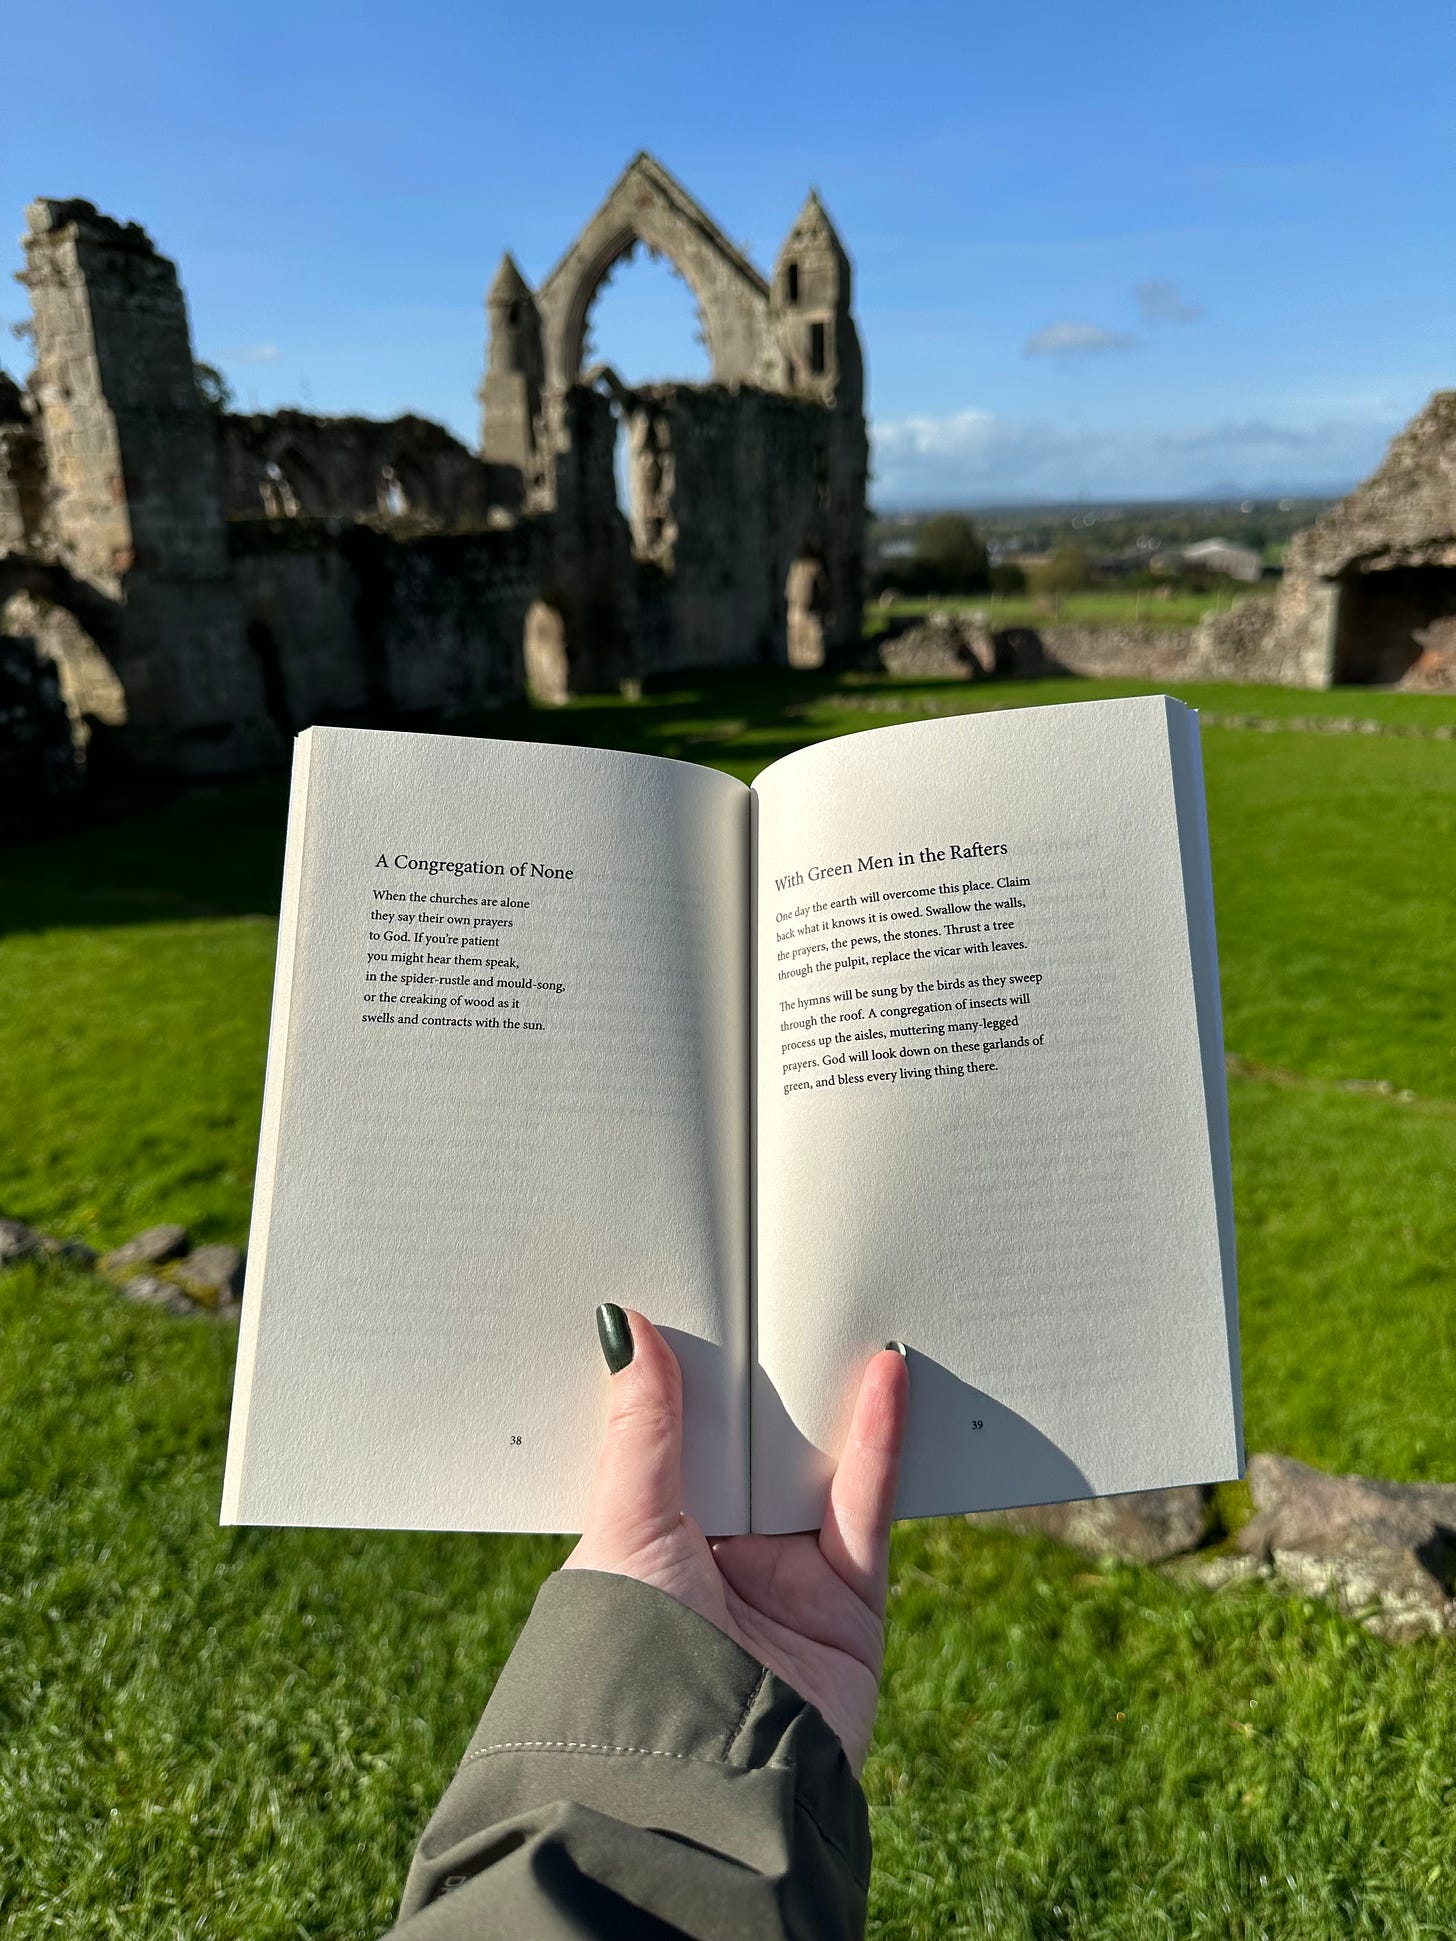 Jay’s book, open to the pages with the two poems I read out, held above the grass and the remnants of stone walls, with the same massive ruined window in the background. The sky is bright blue and the sun is strong.